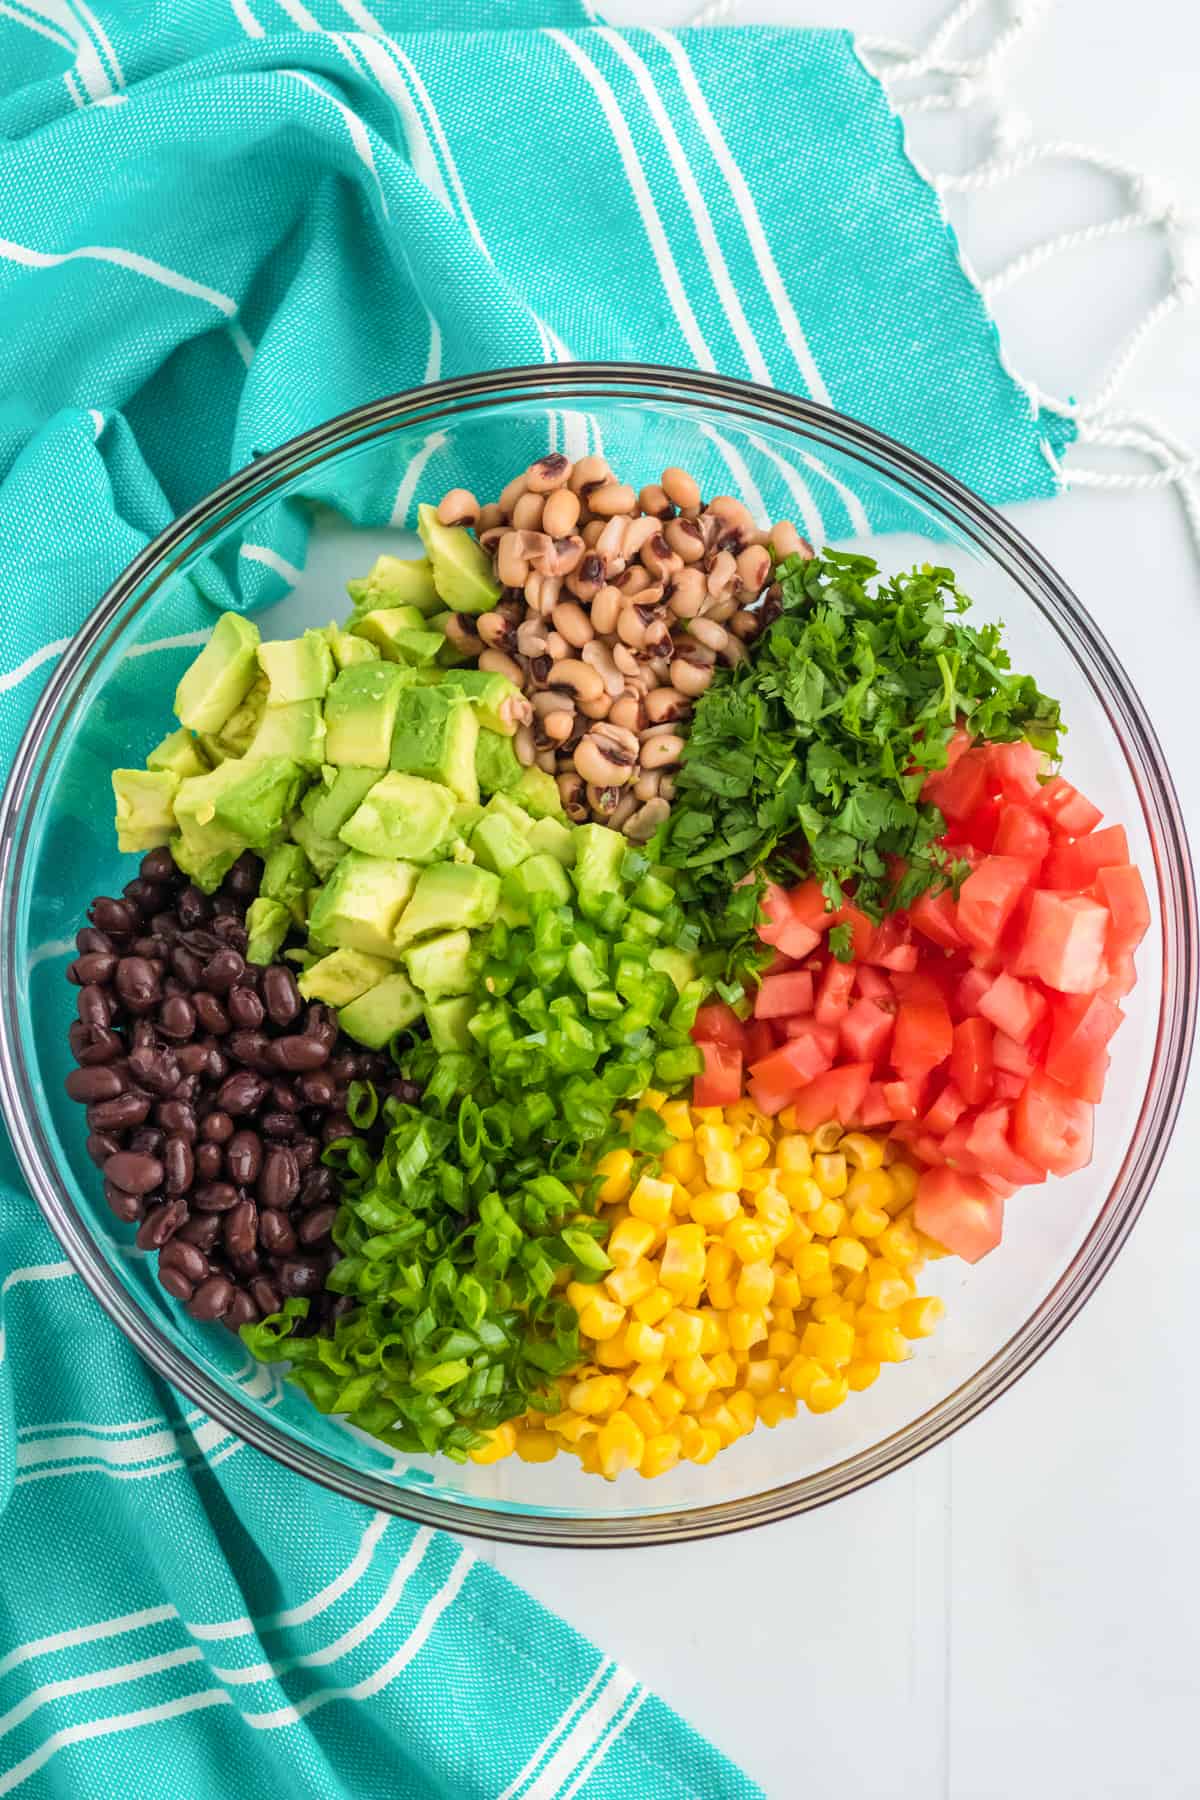 Corn, black beans, black eyed peas, and chopped avocado, jalapeño, scallions, tomatoes, and cilantro in a large mixing bowl.